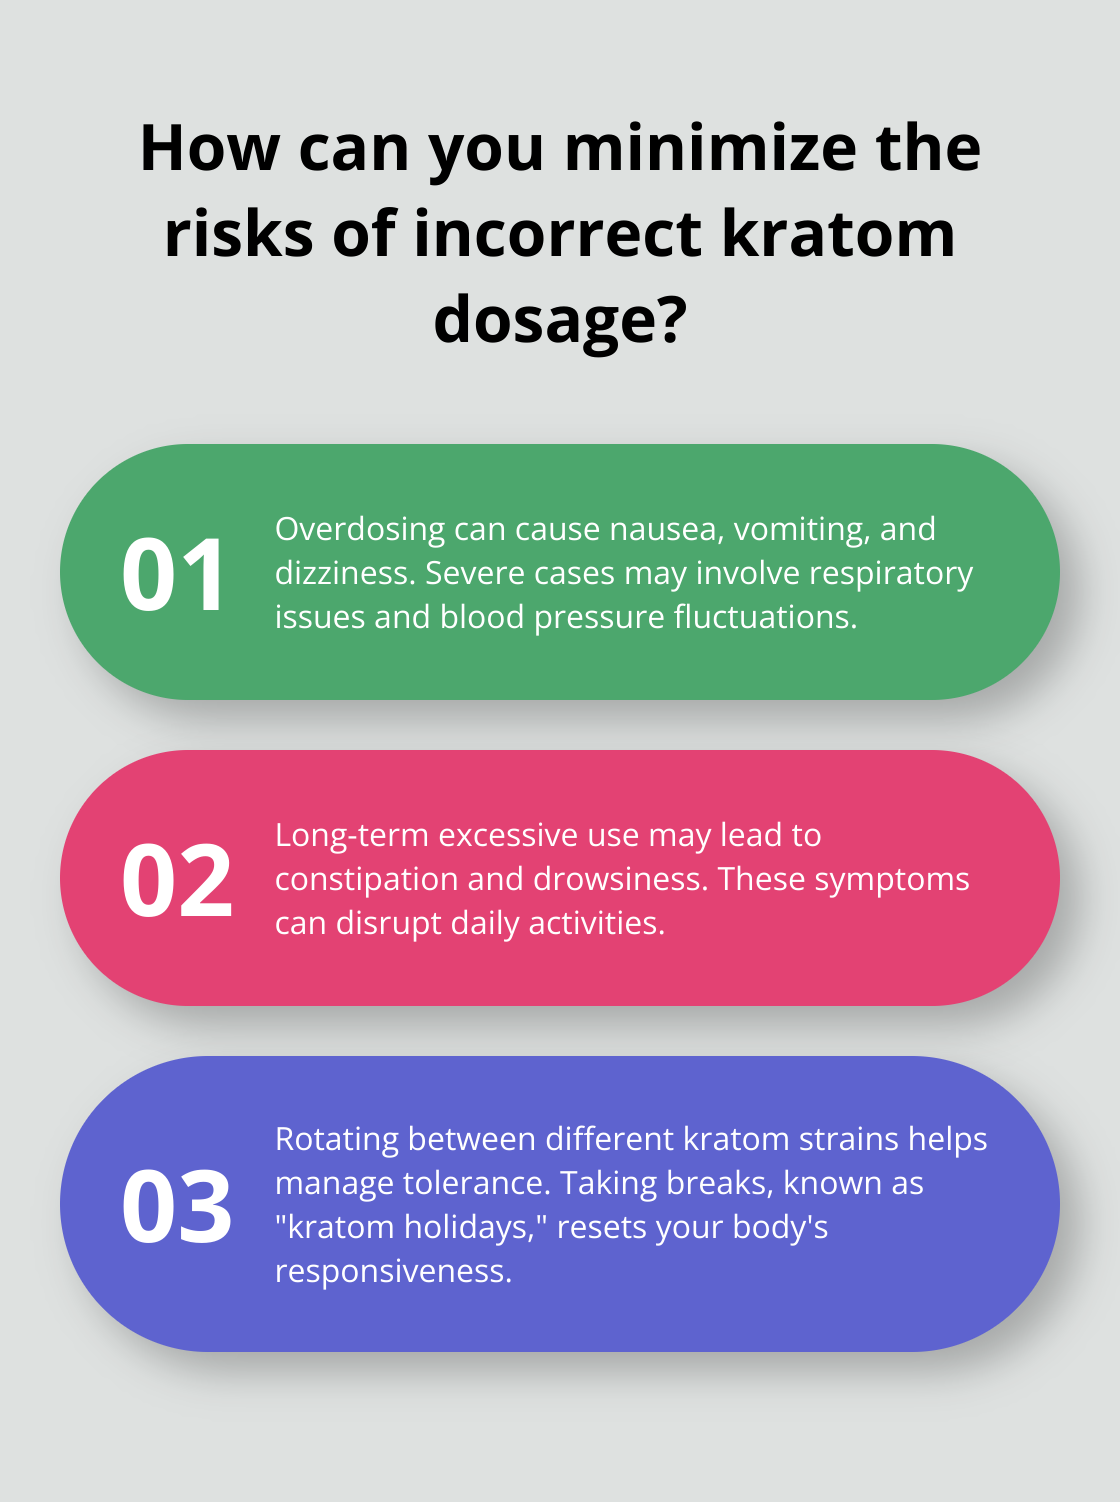 Fact - How can you minimize the risks of incorrect kratom dosage?